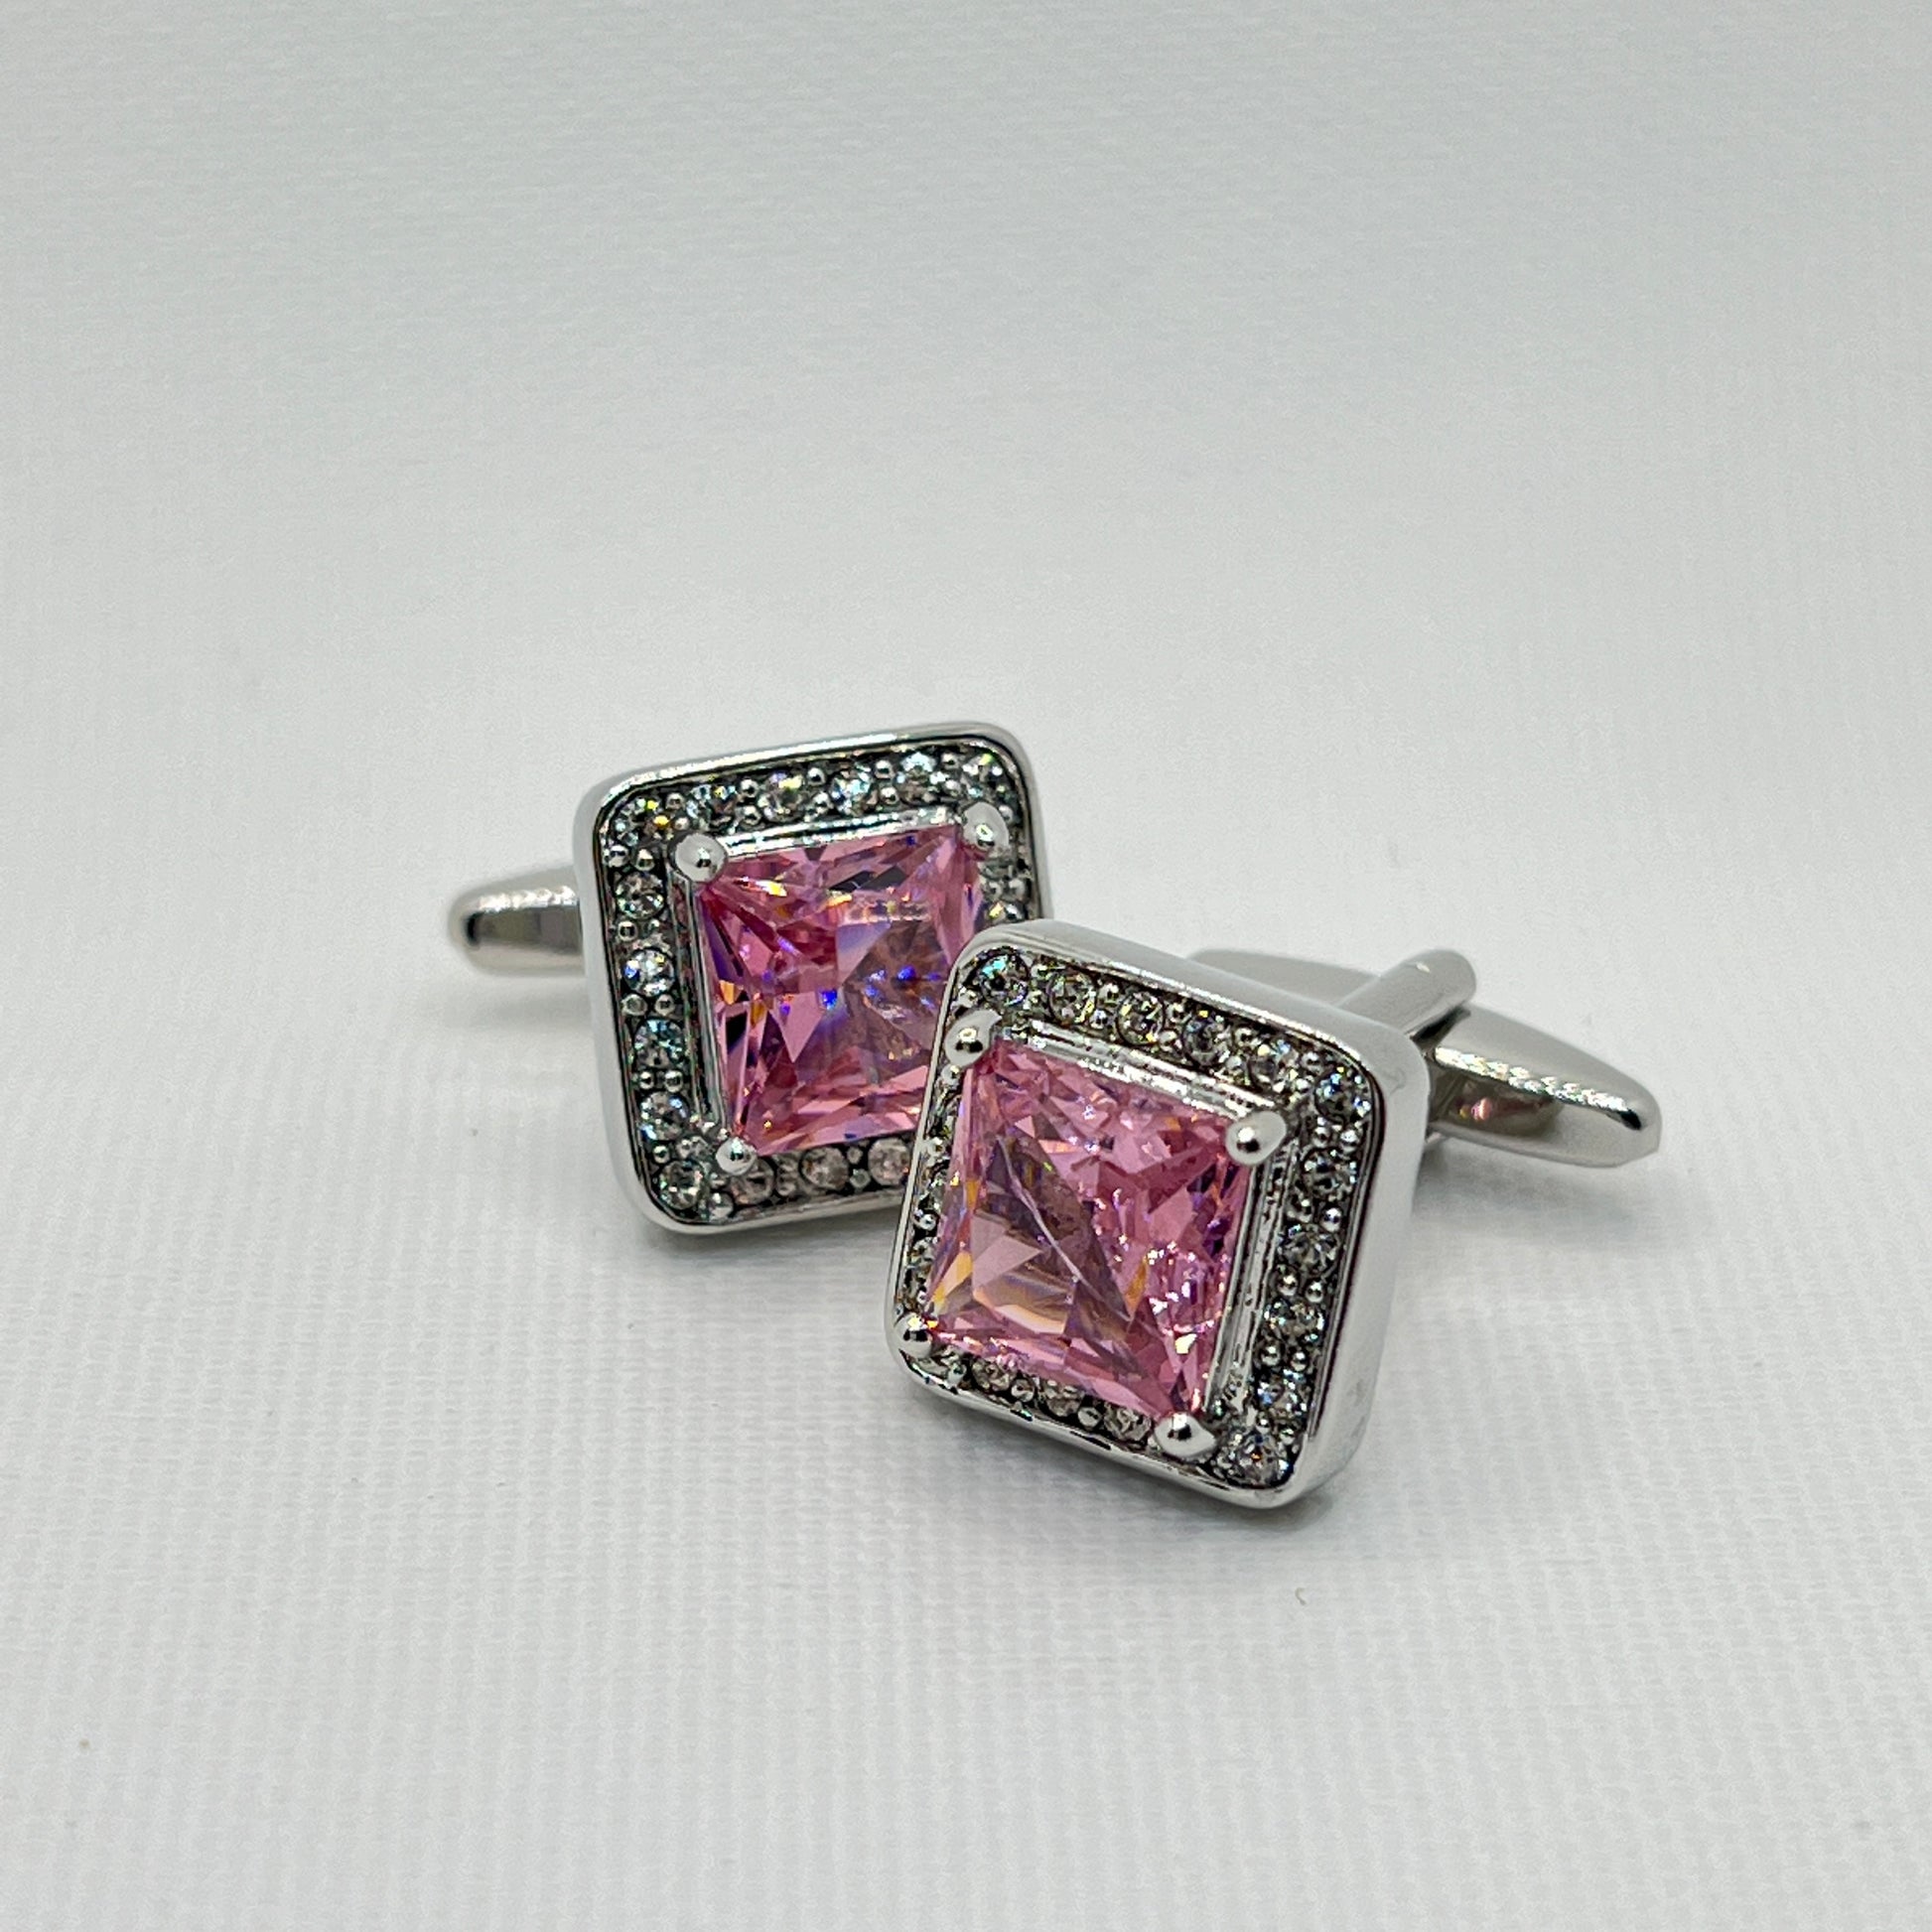 Tasker & Shaw | Luxury Menswear | Silver square cufflink with sparking pink clear crystals